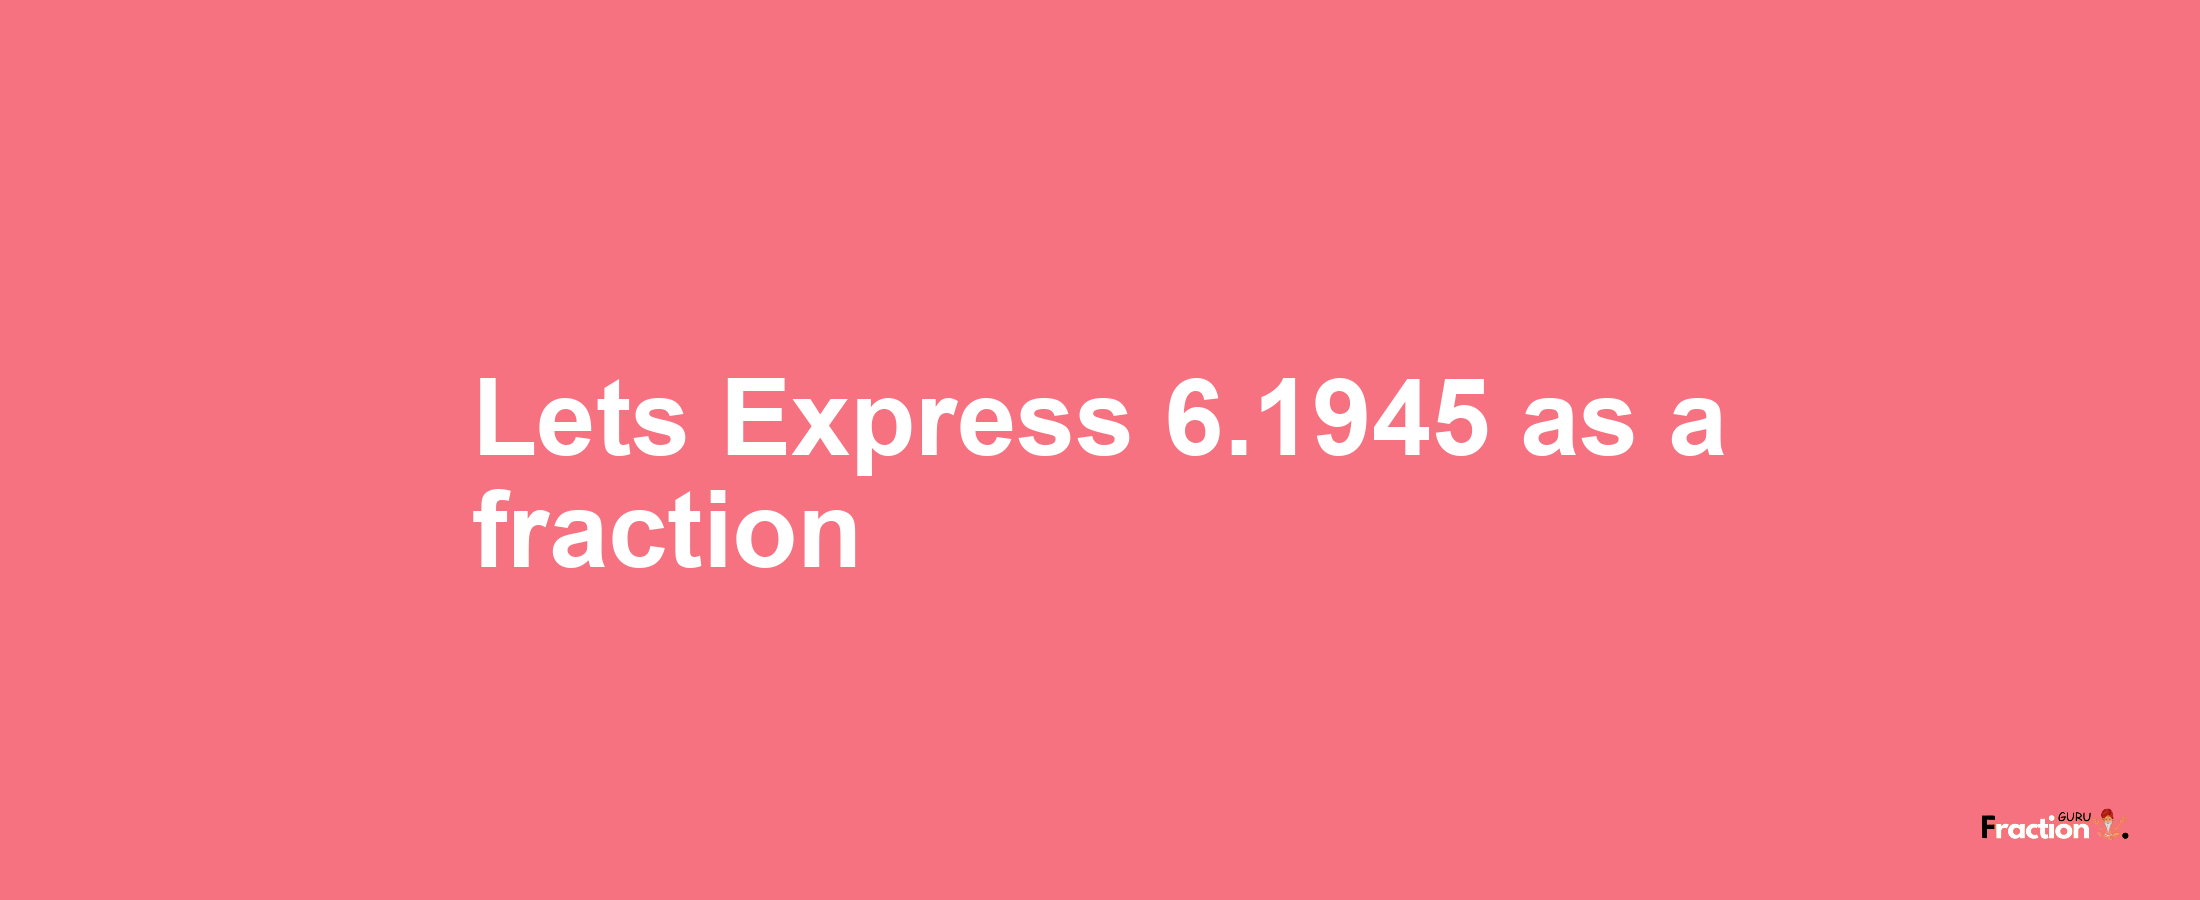 Lets Express 6.1945 as afraction